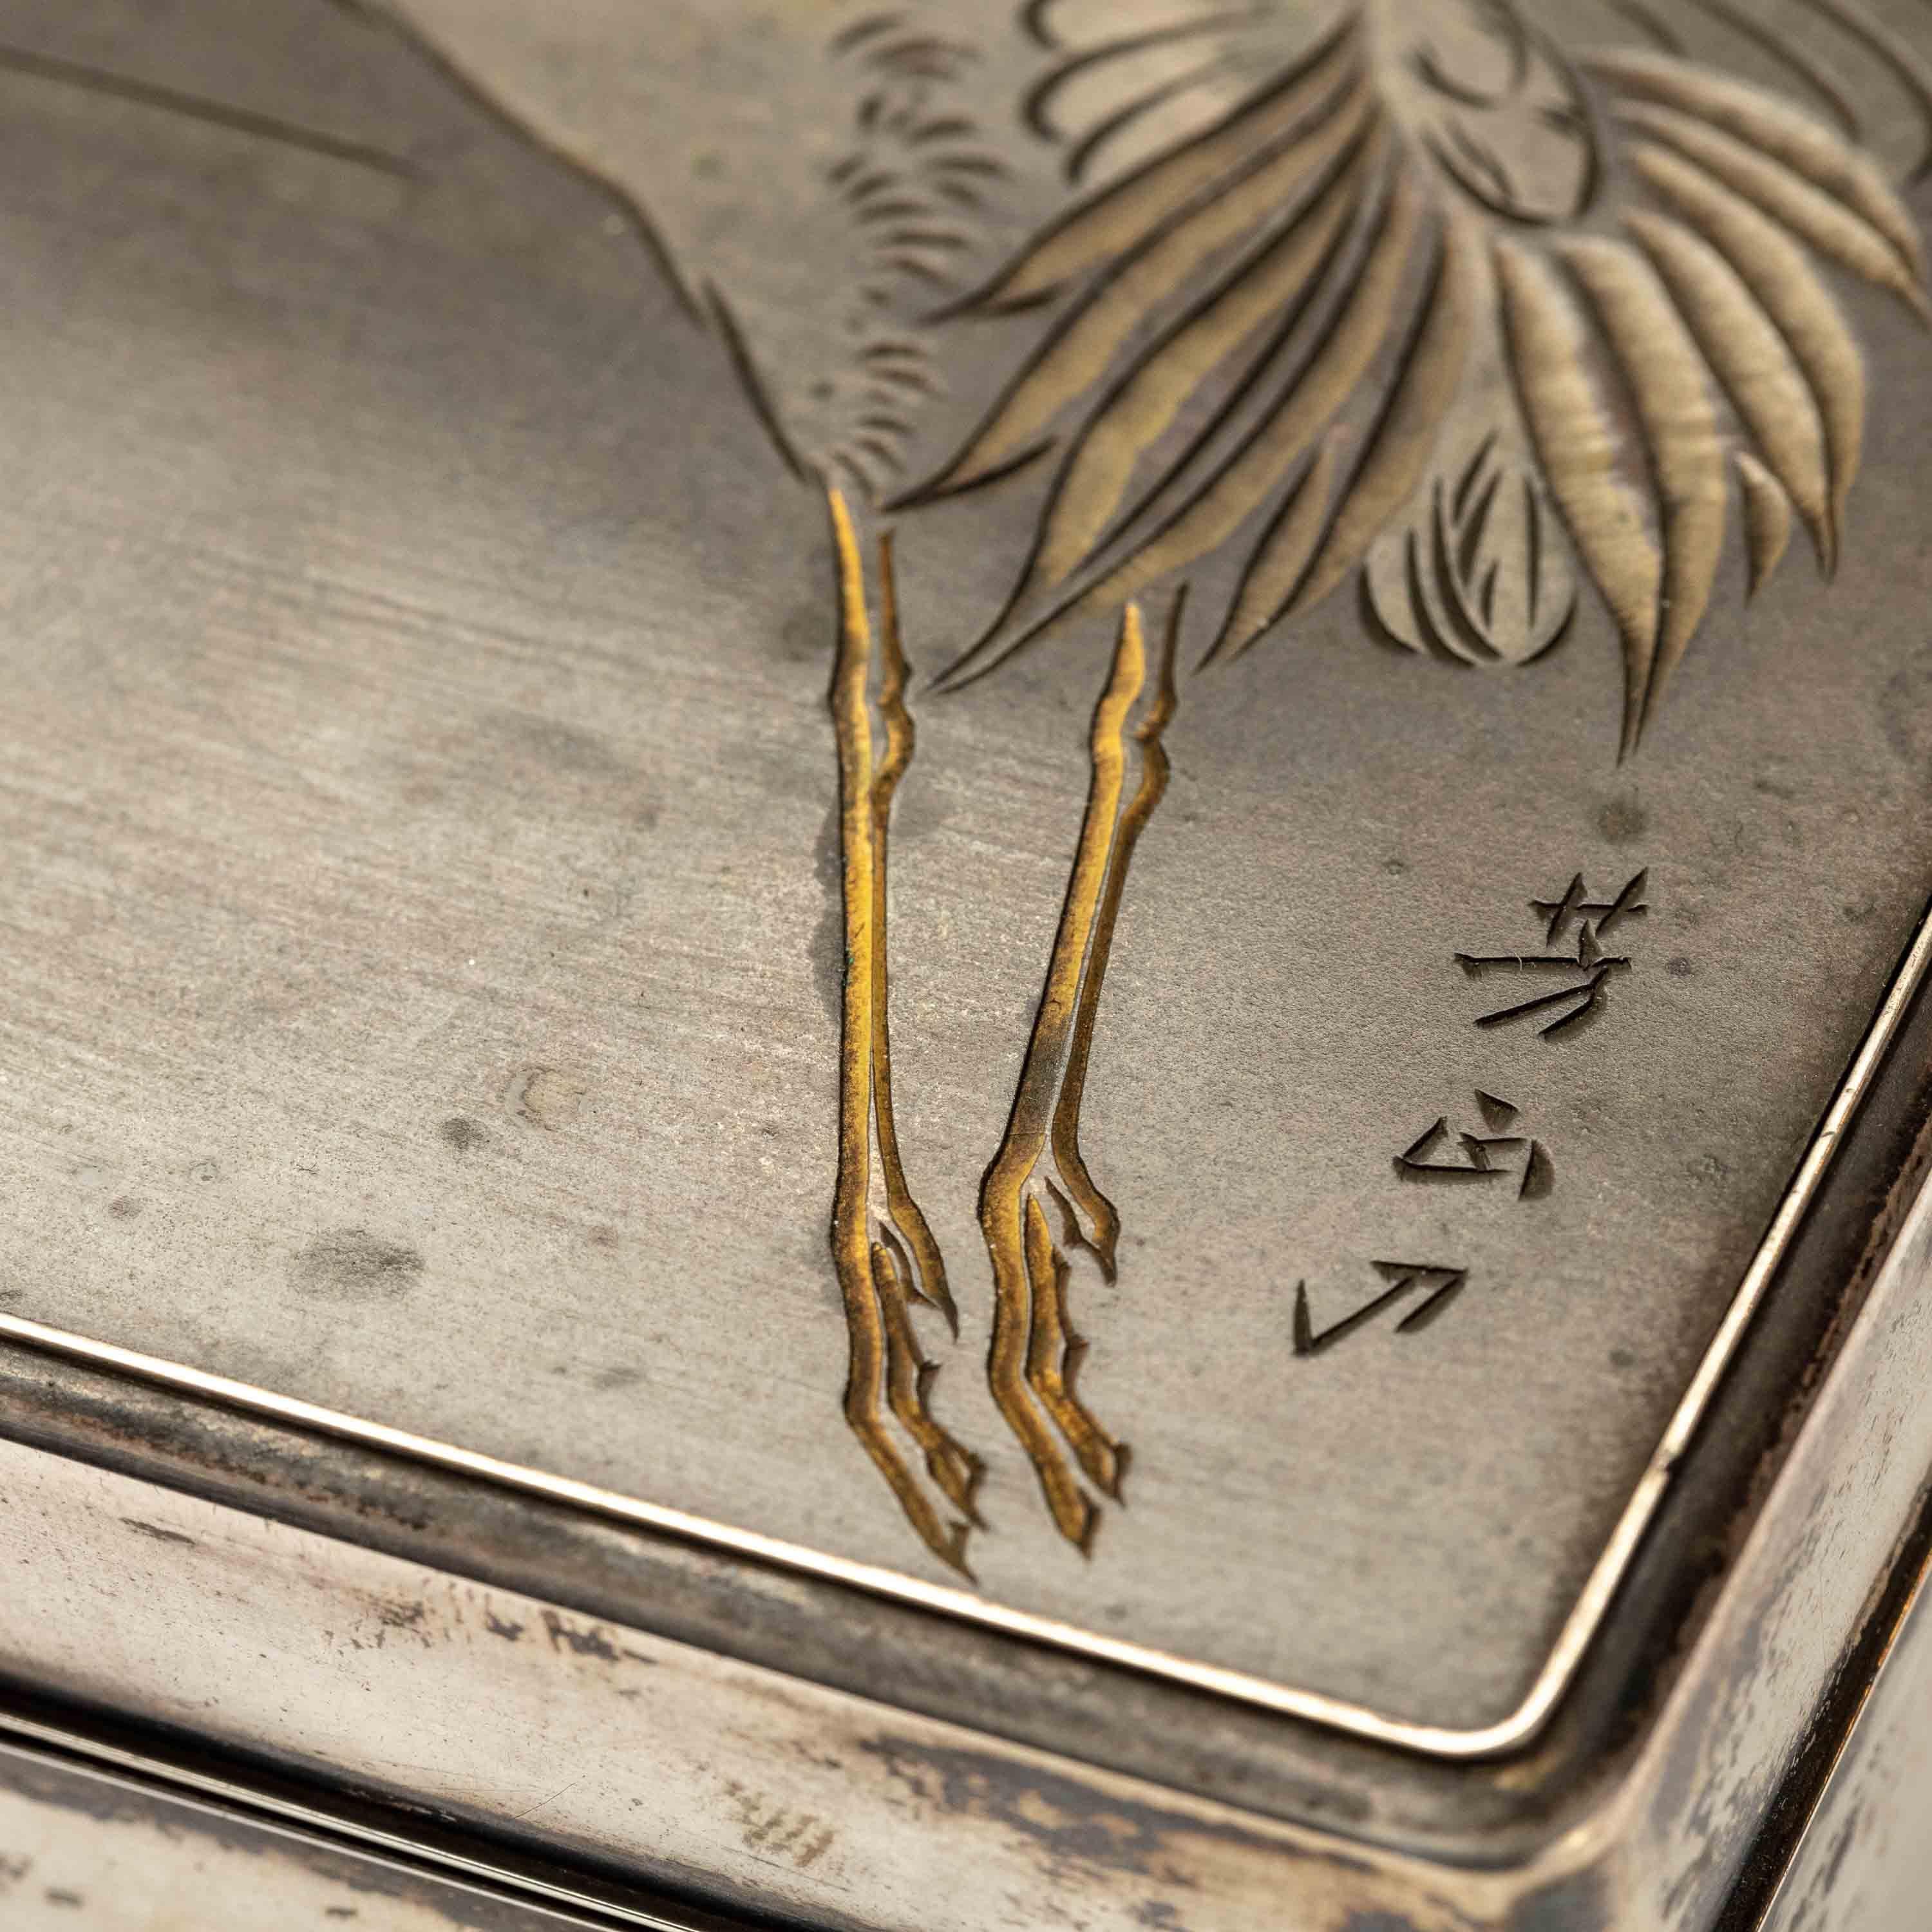 Mid-20th Century Silver Cigarette Box with Incised Cranes from Japan